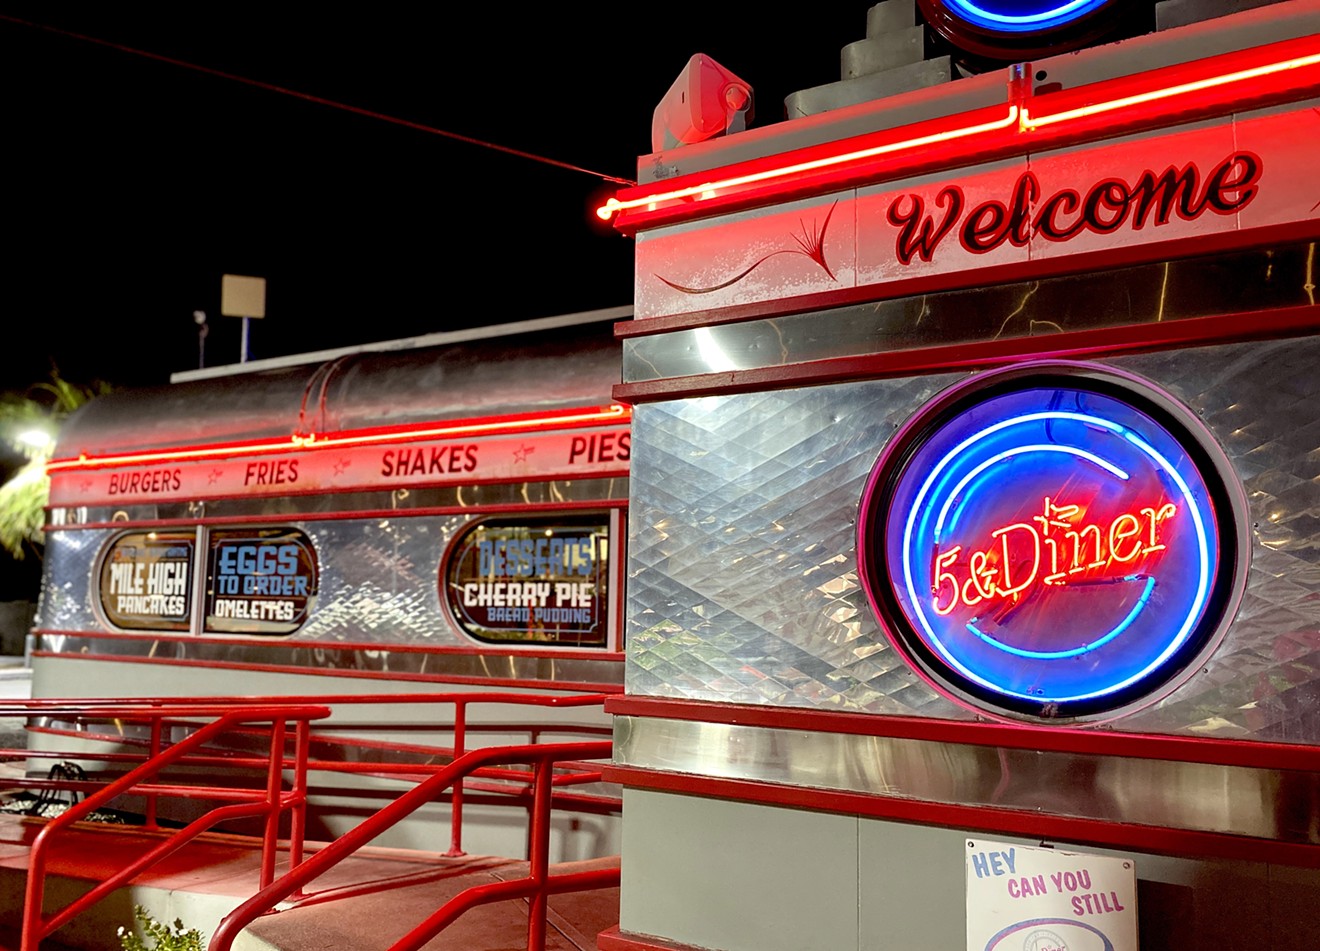 Get ready for a romantic and retro date at 5 & Diner.